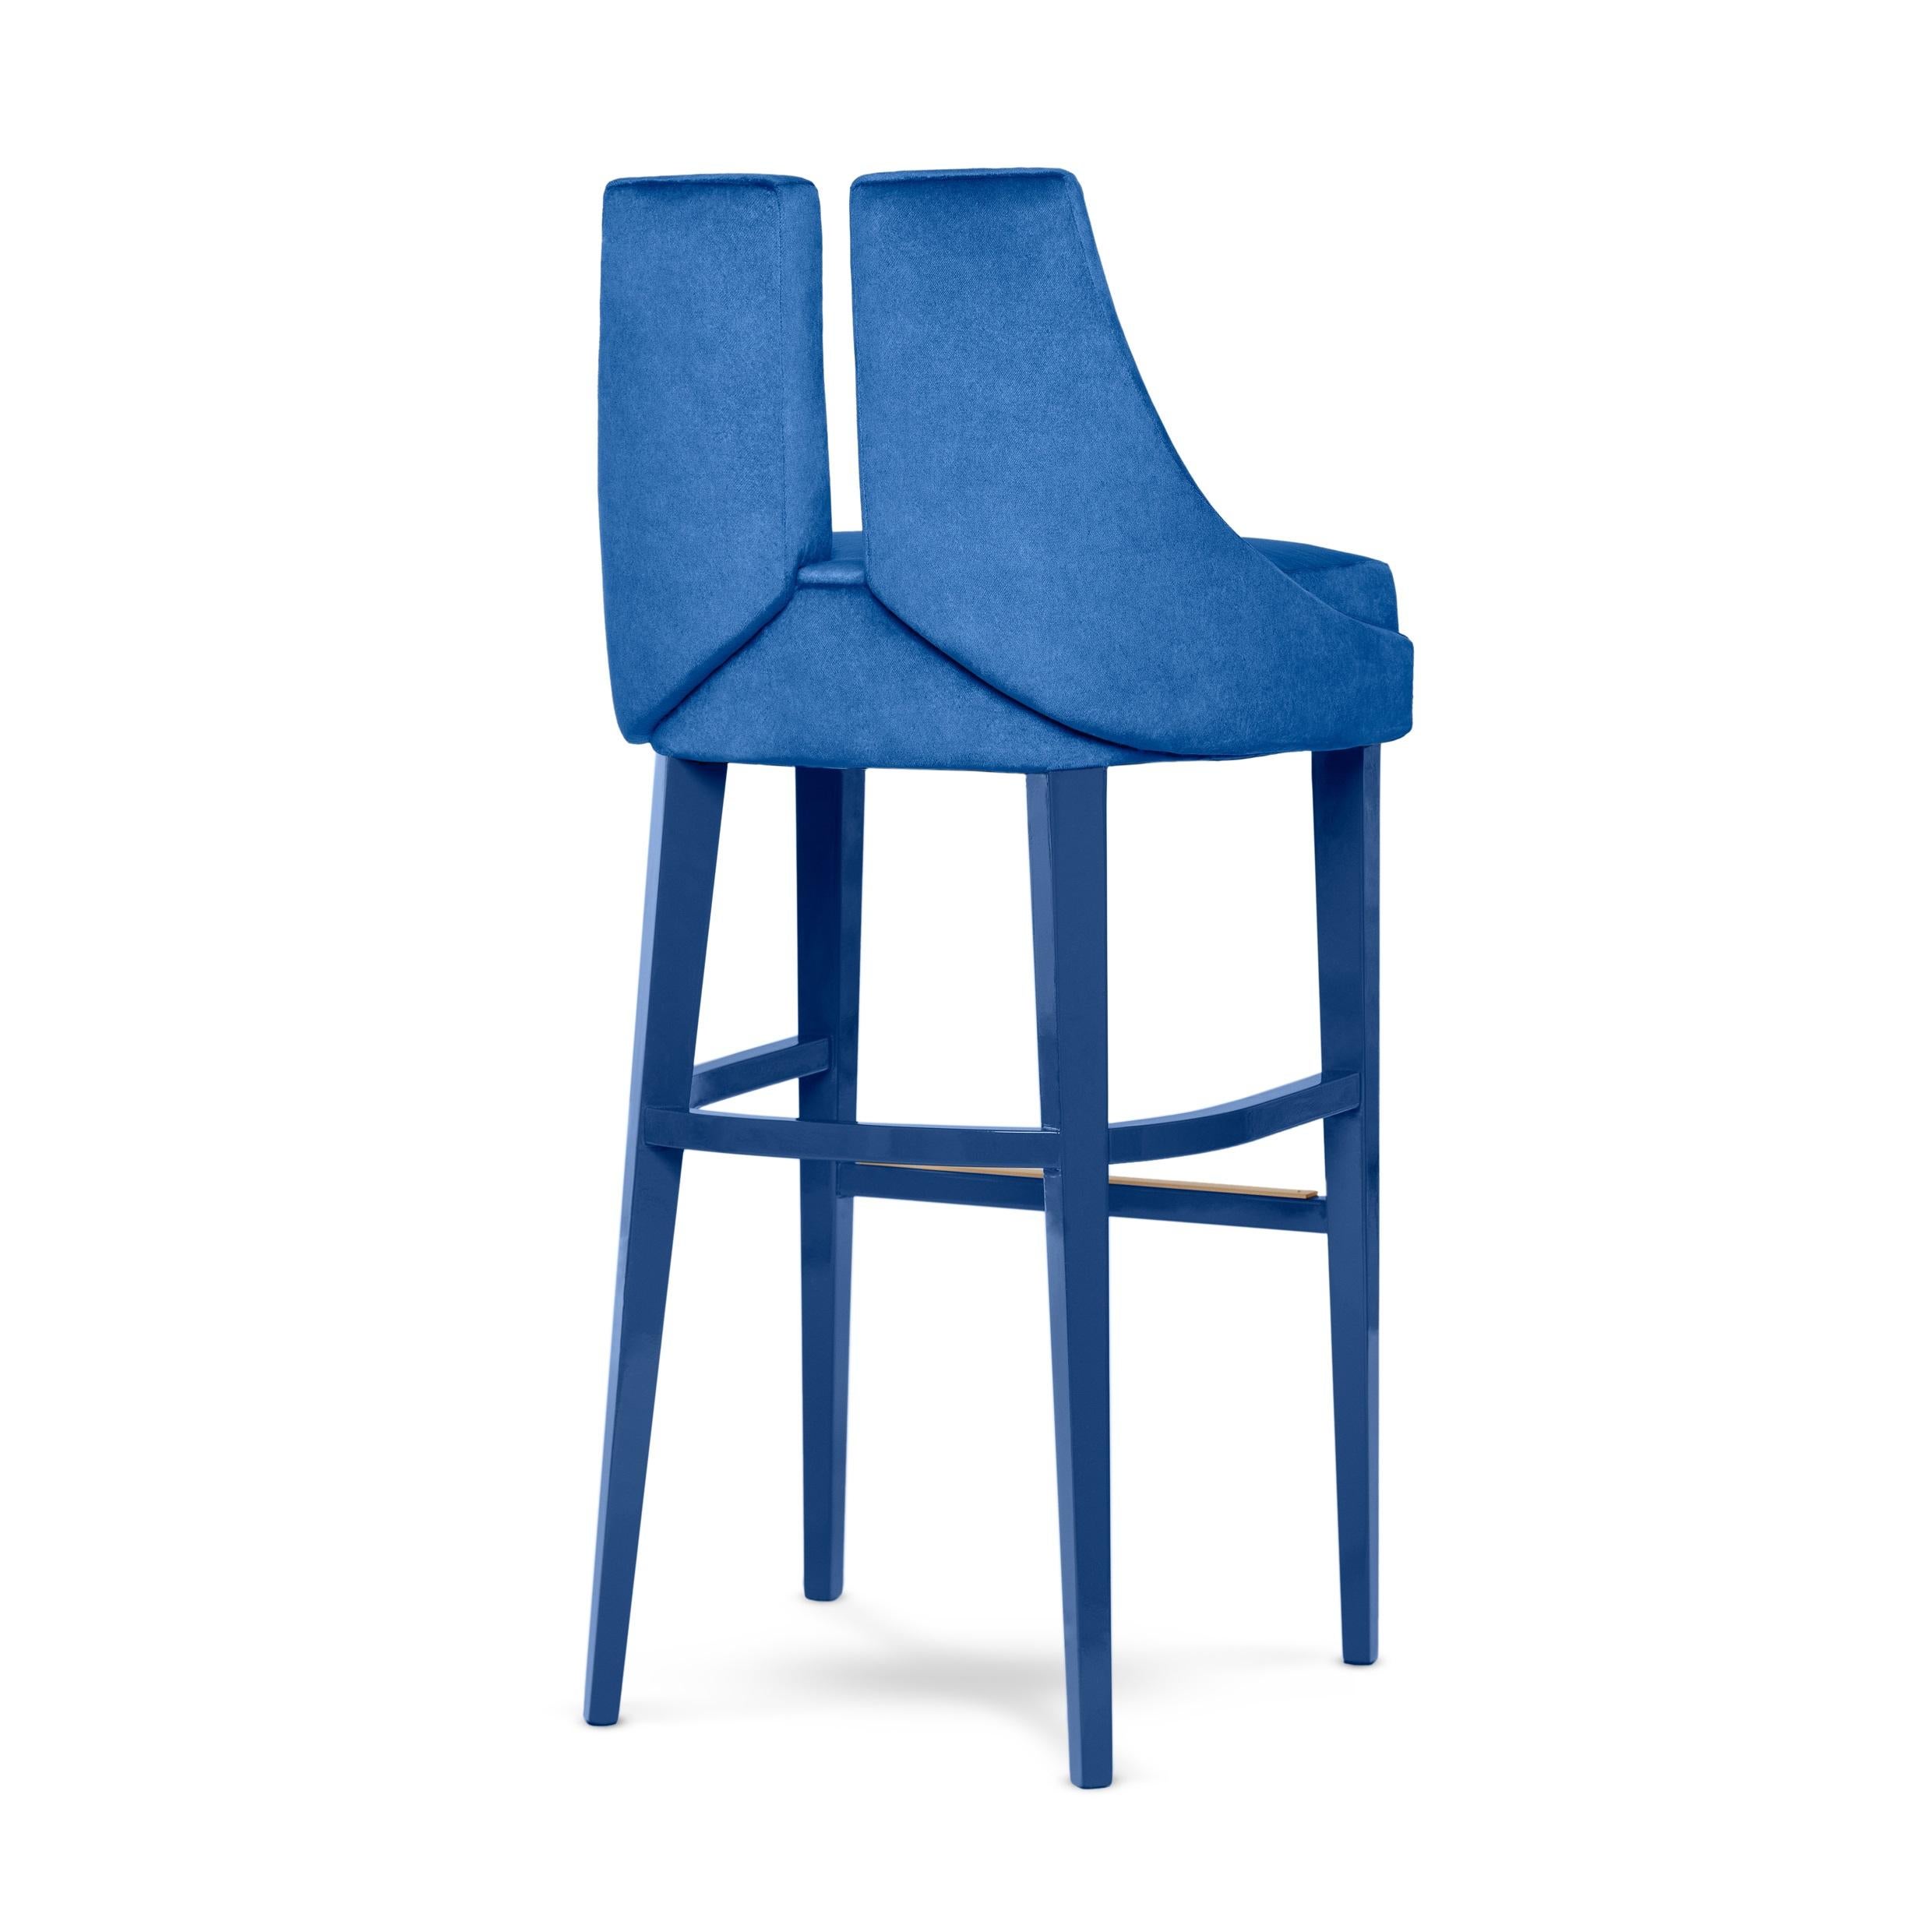 Modern Contemporary Barstool w/ Seaming Details For Sale